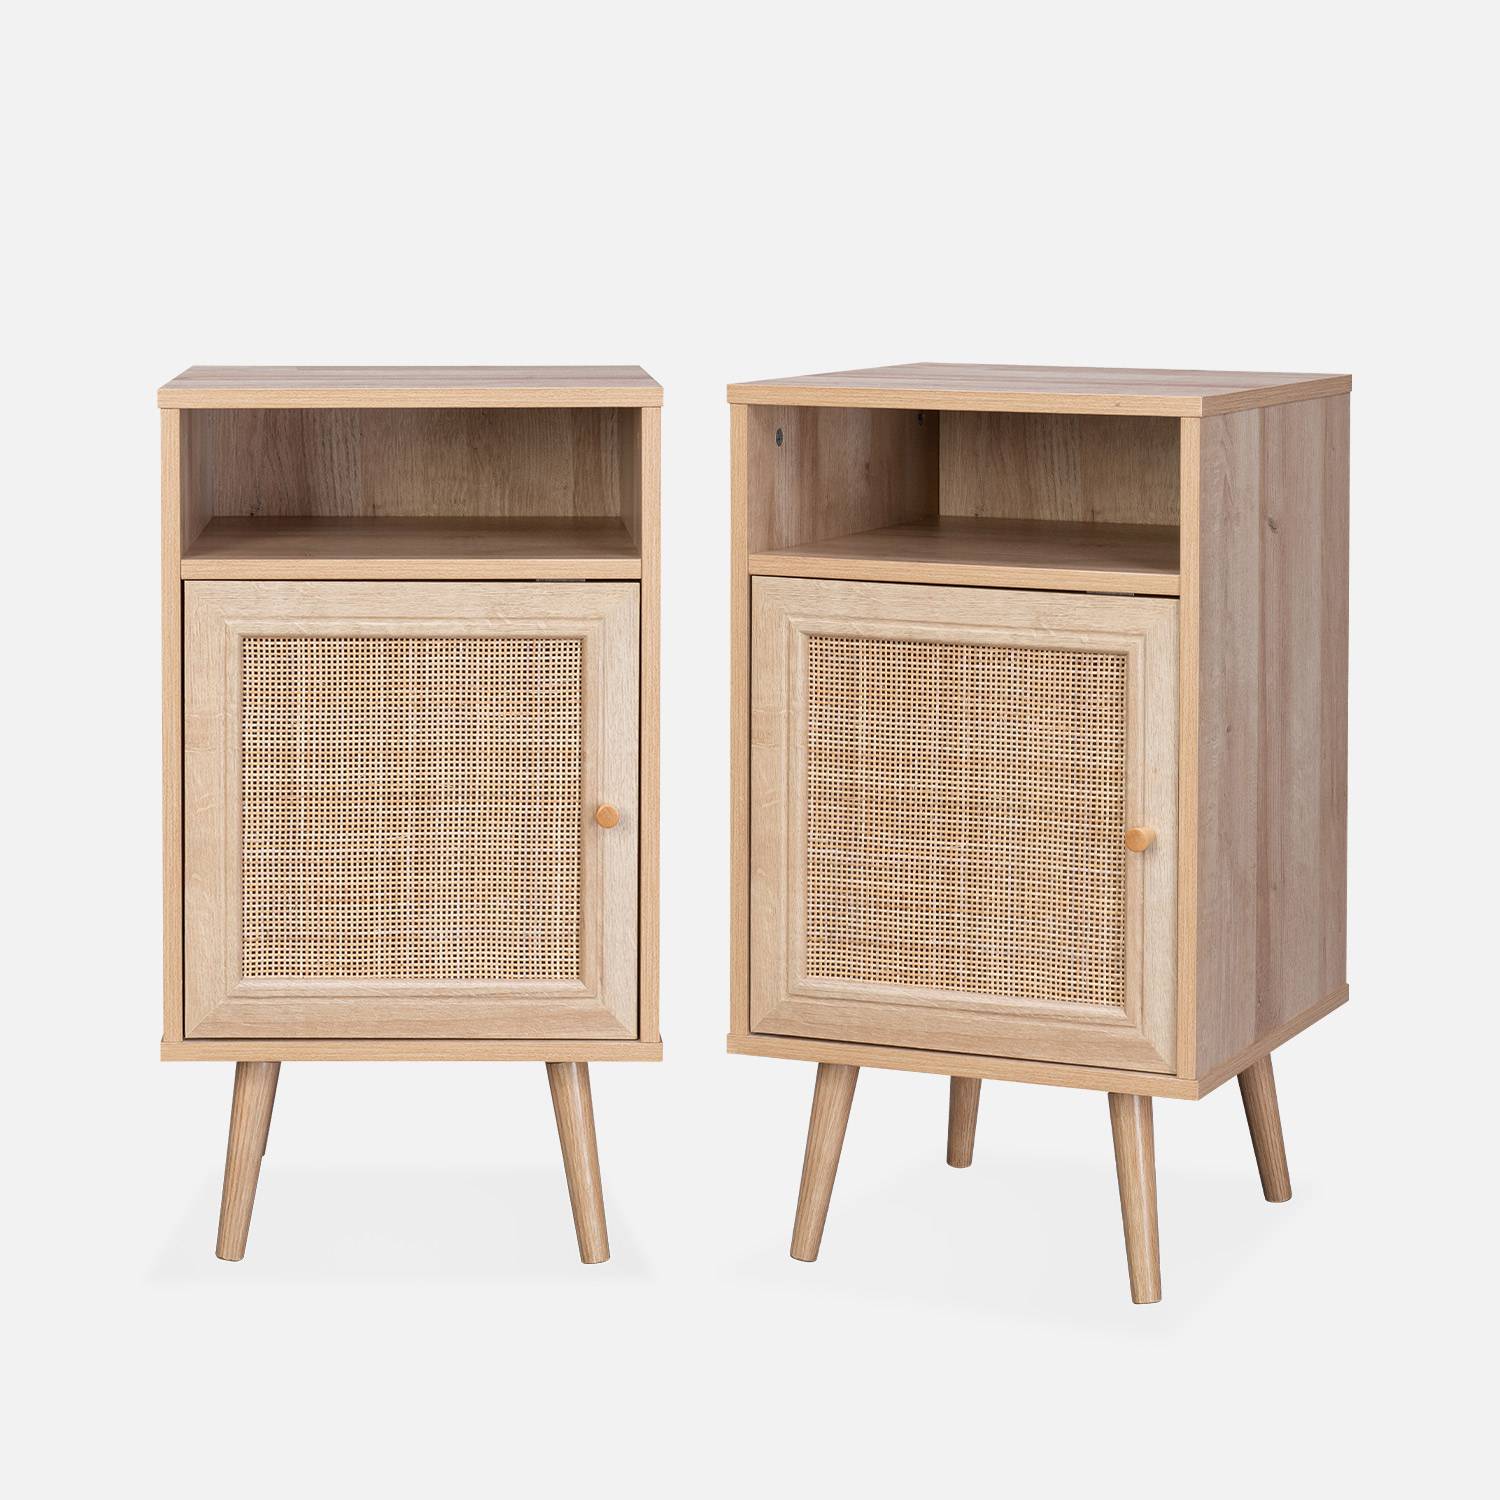 Pair of Scandi-style wood and cane rattan bedside tables with cupboard, 40x39x70cm, Natural Wood colour | sweeek